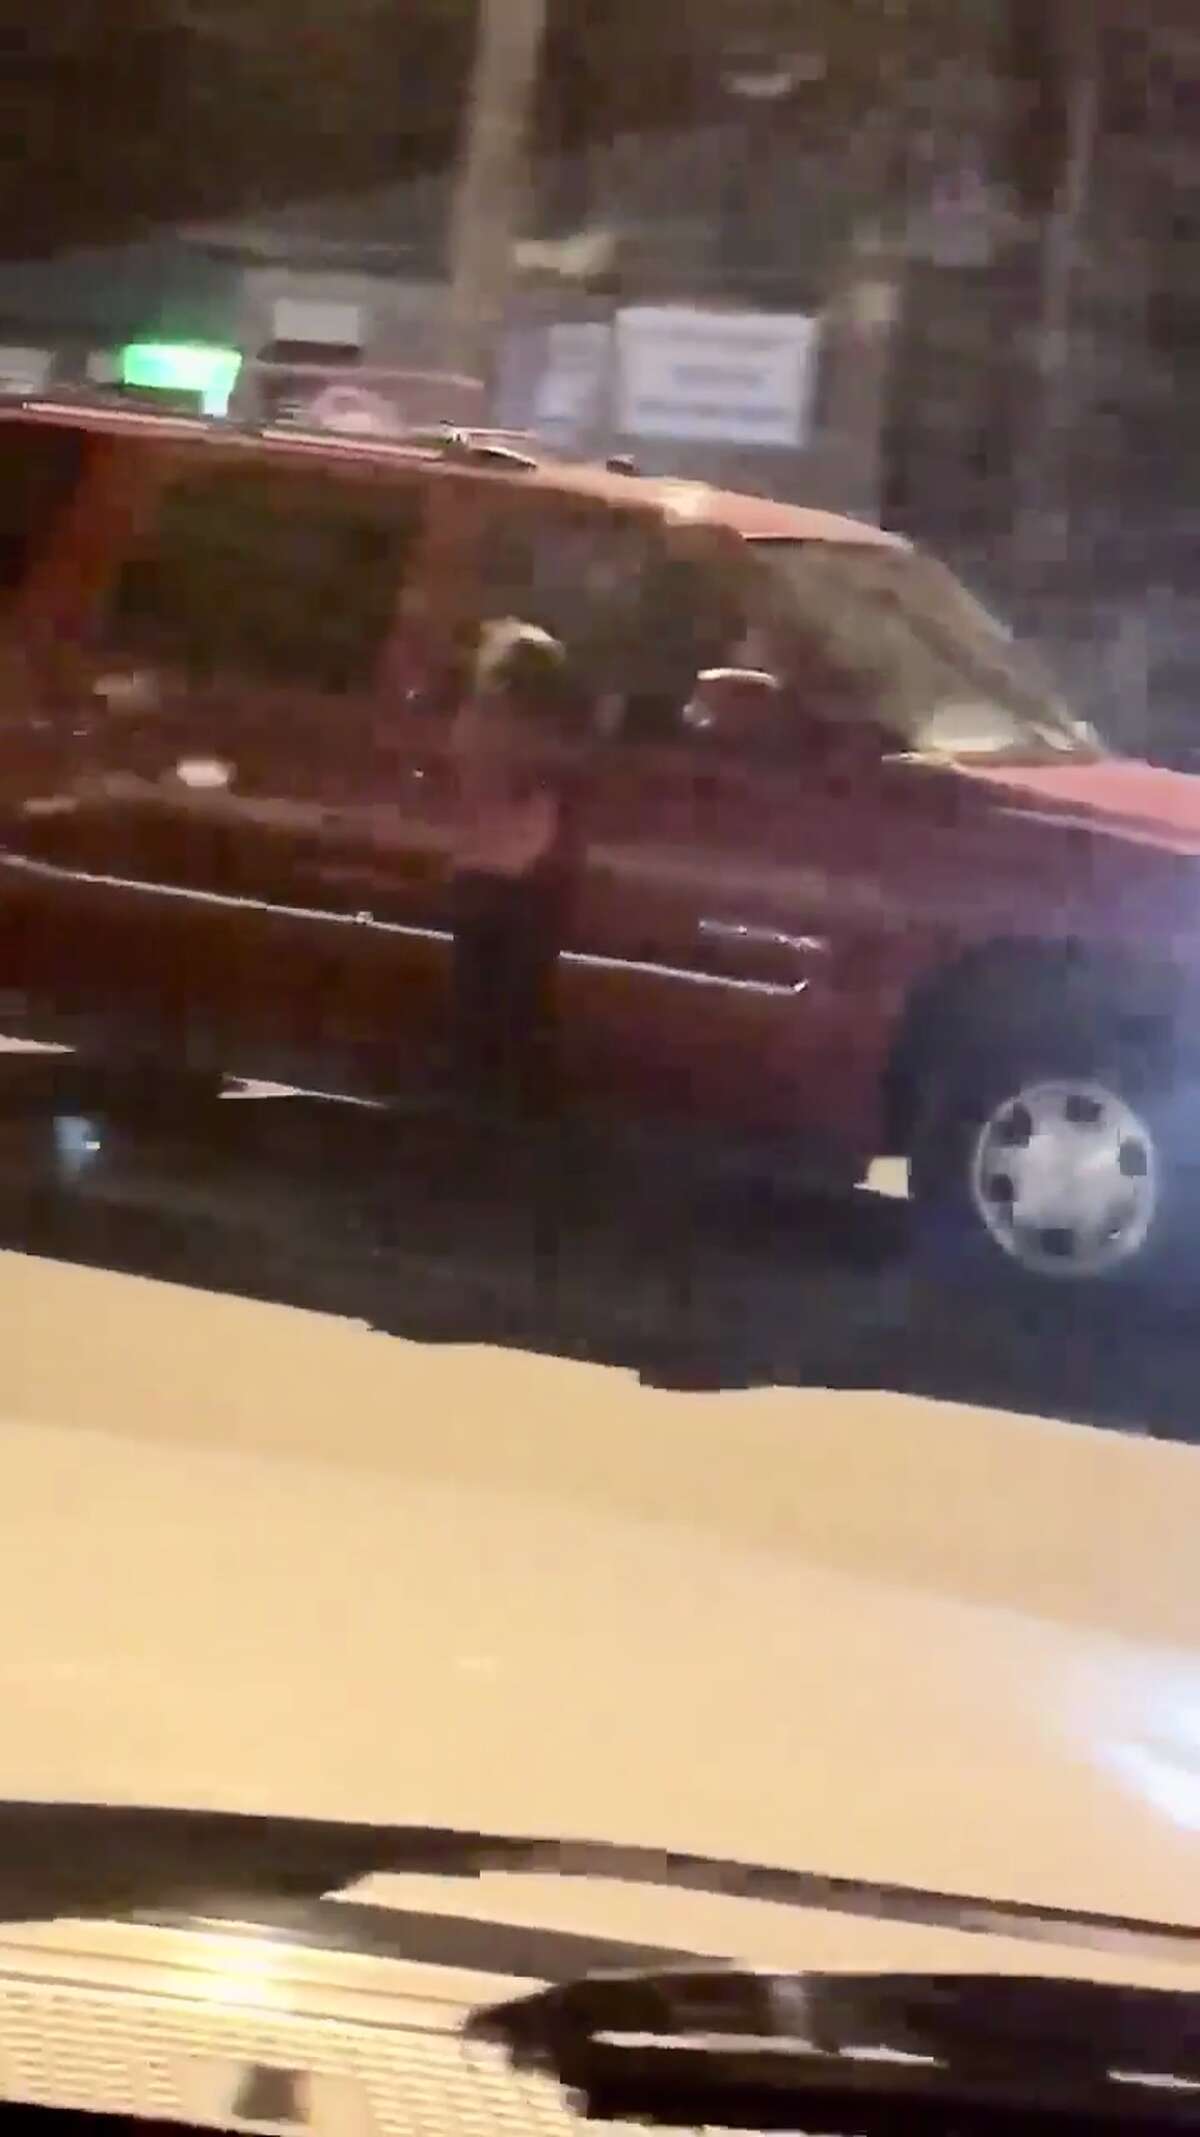 Screenshots taken from a shocking video shared by the Laredo Police Department show a child hanging onto a passenger door while an SUV drives through the parking lot of a local business.